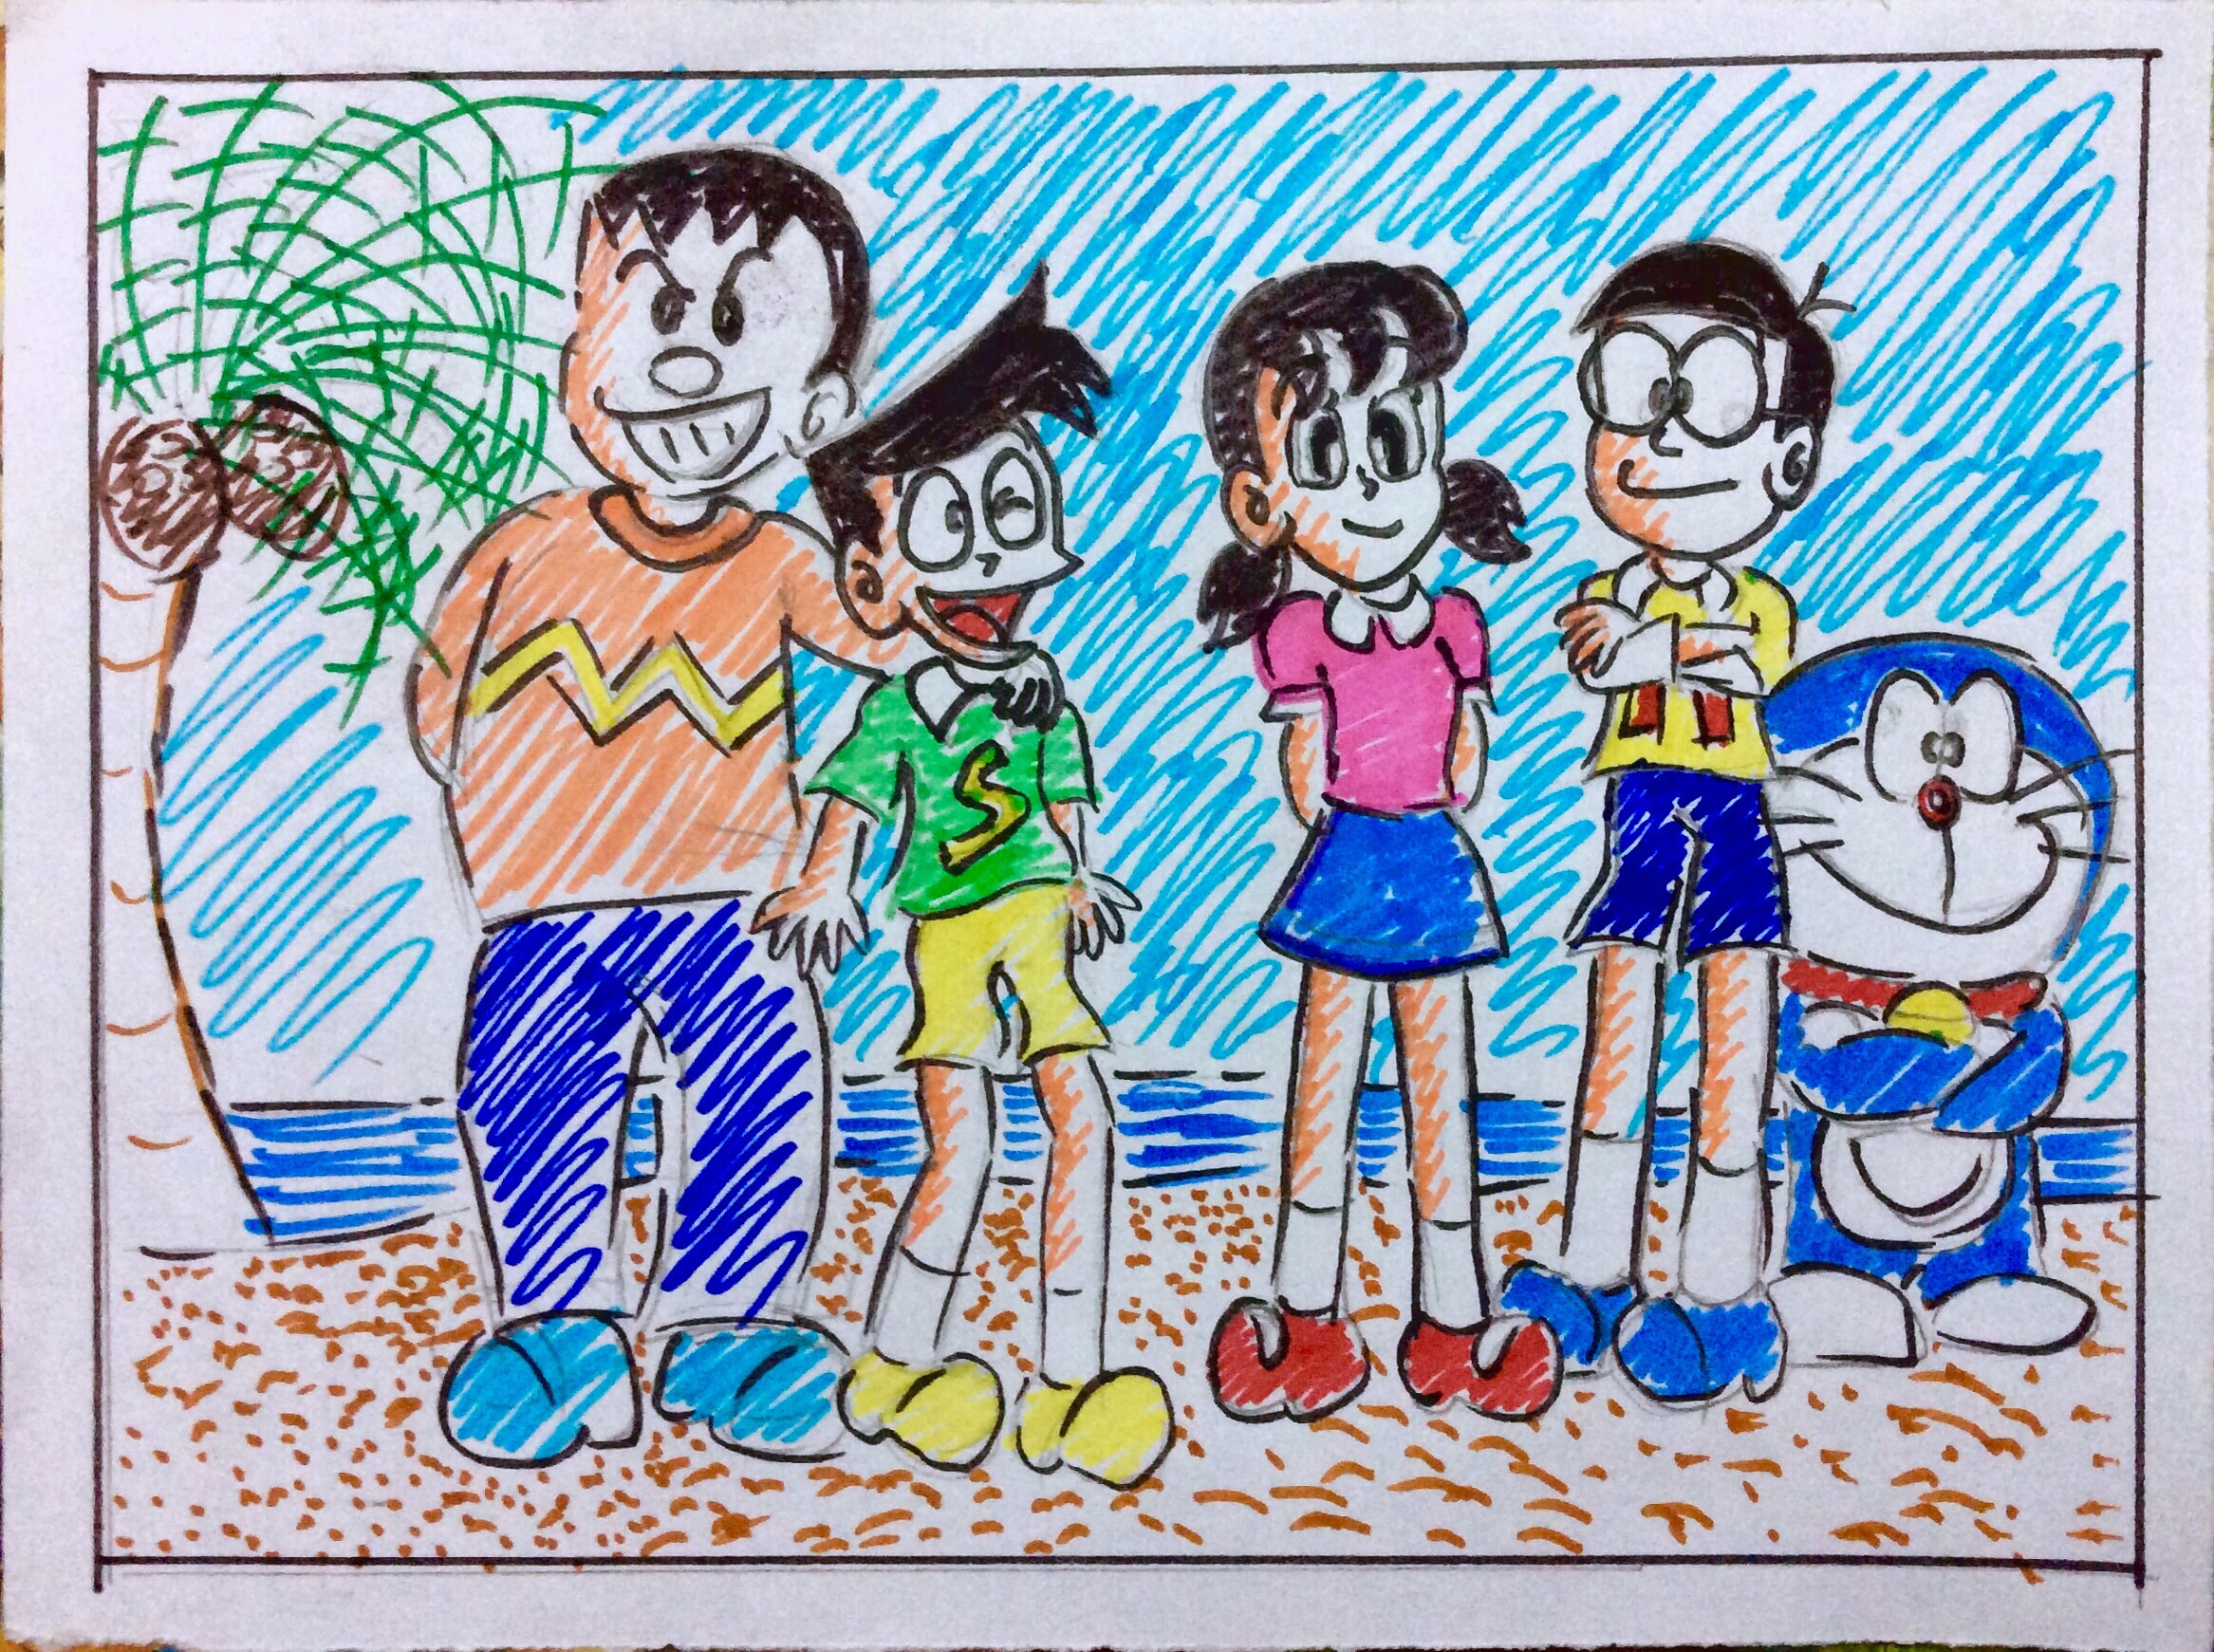 Doraemon and Friends Group Photo At the Beach by doraemon suneo on